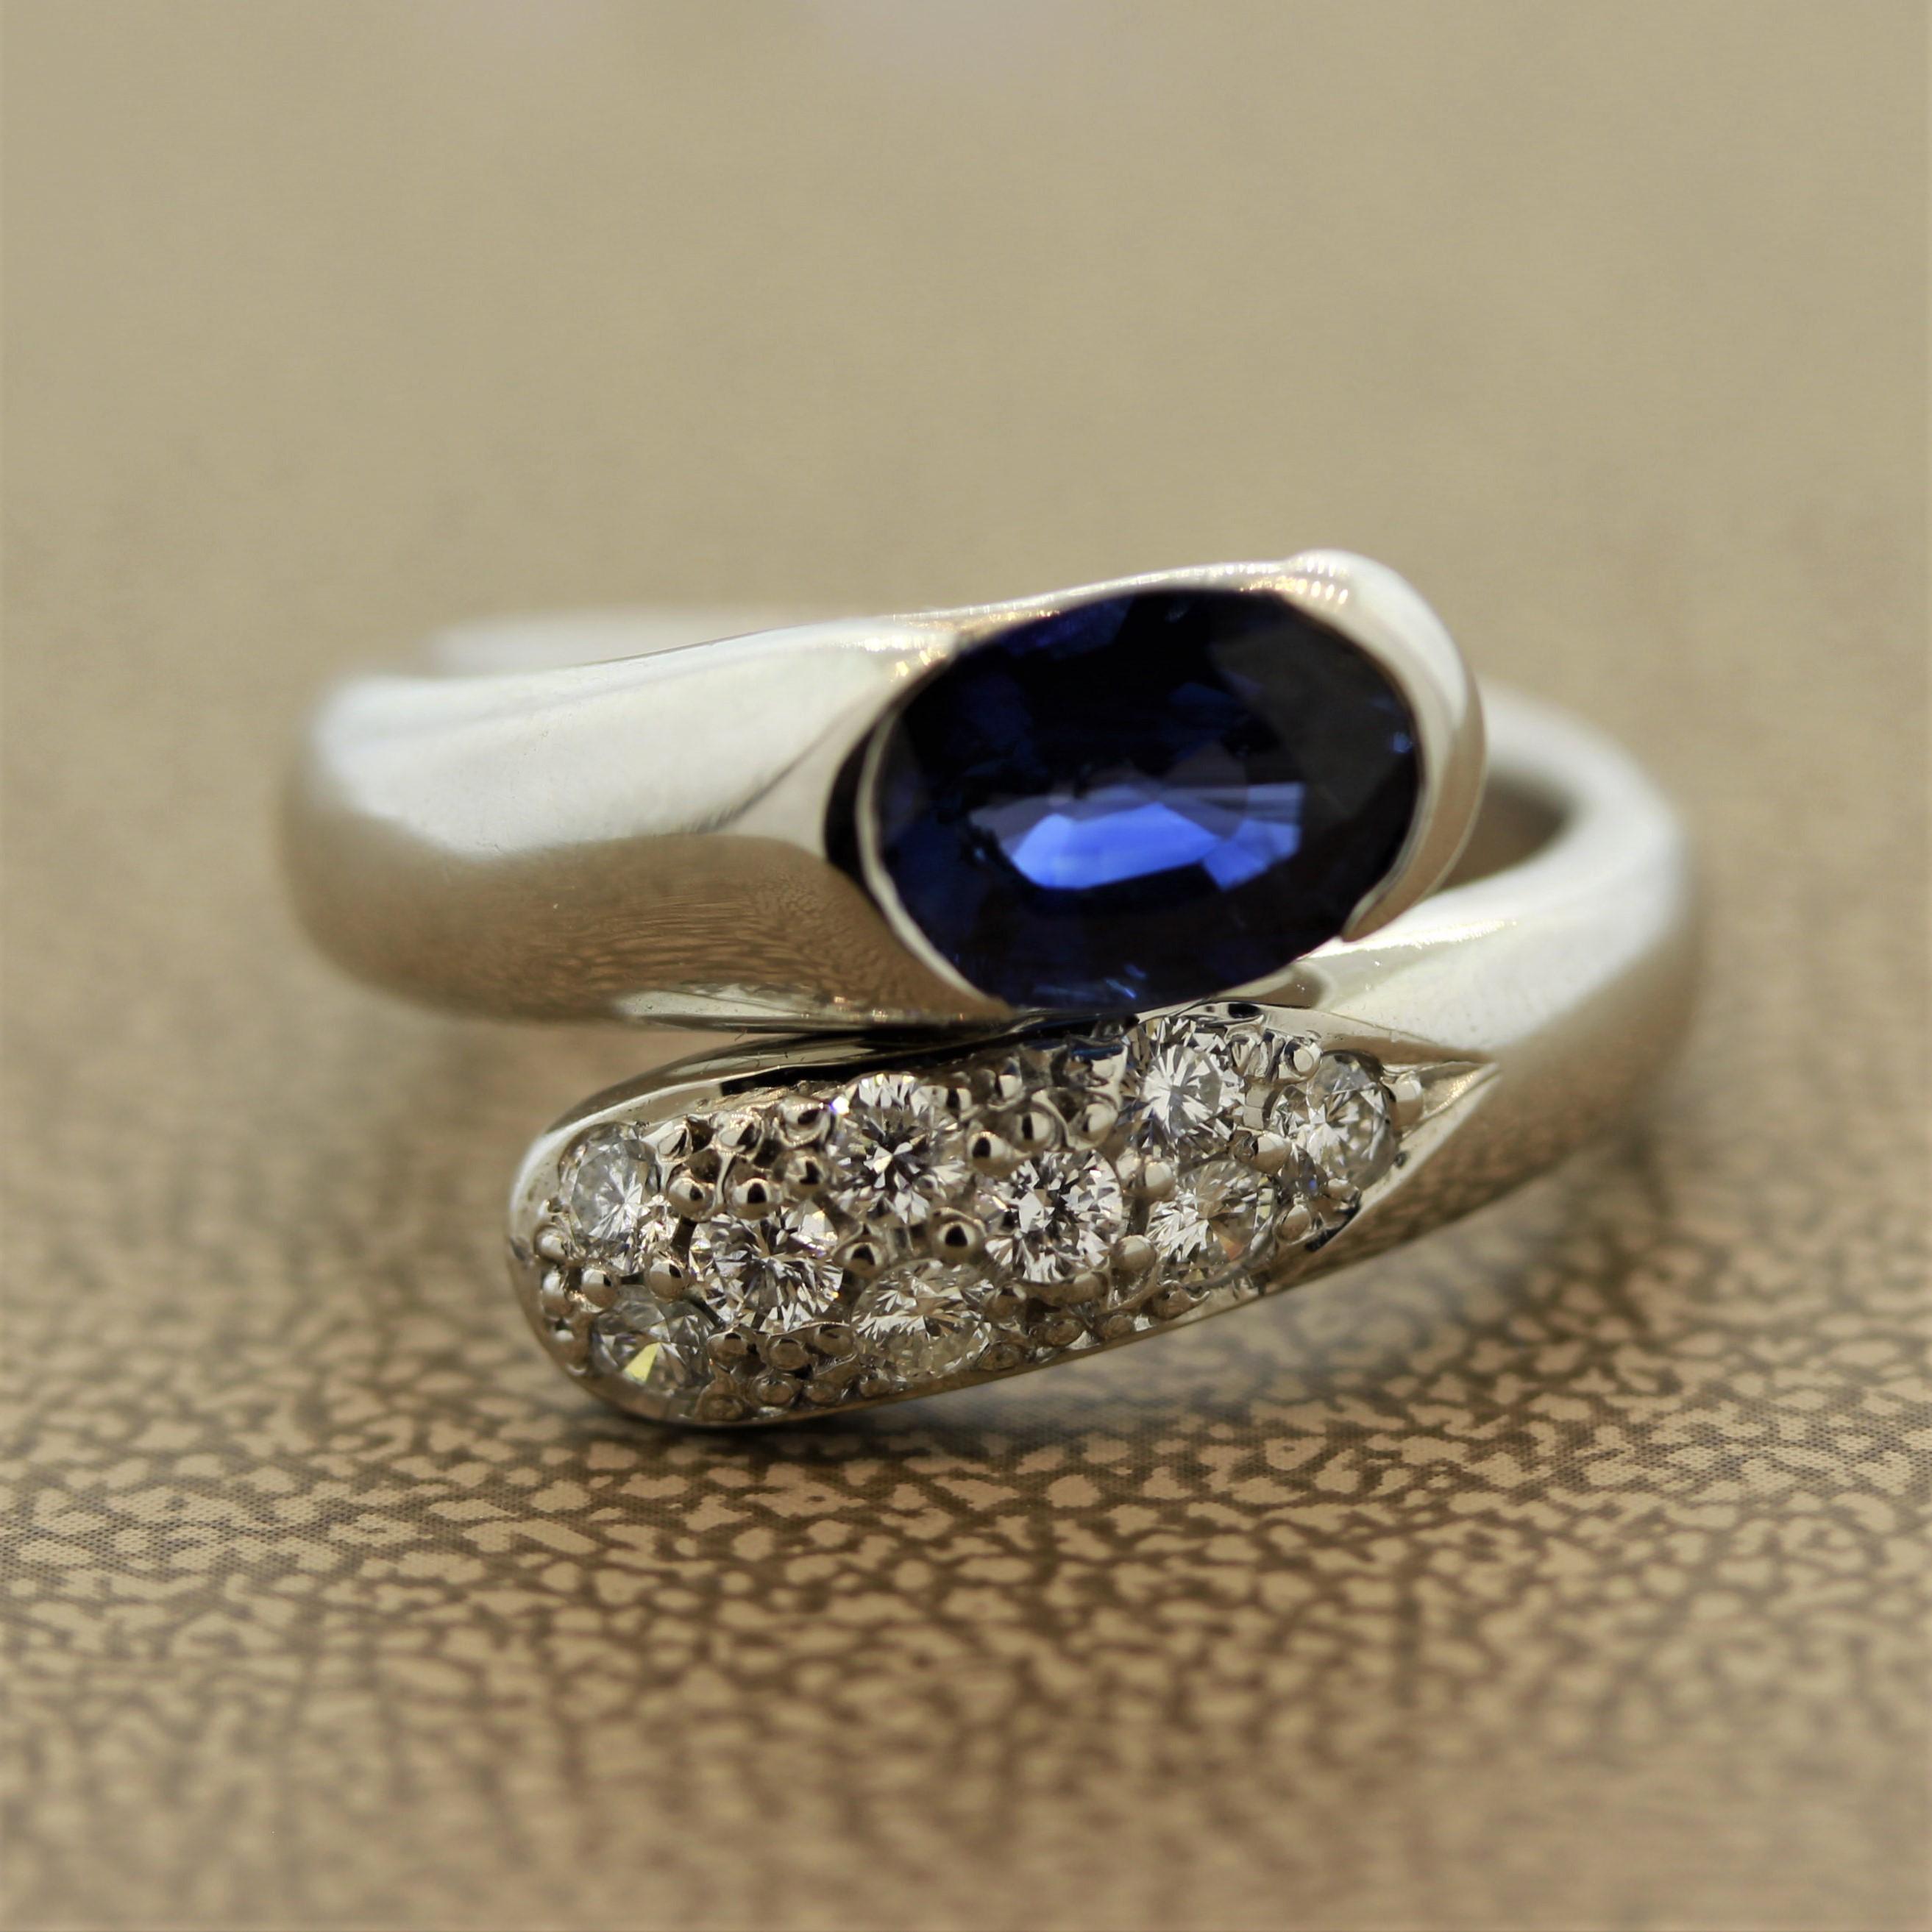 An expertly hand-made platinum bypass ring. It features a 1.49 carats oval shaped blue sapphire. It is bezel set with two of its sides free. Accenting the sapphire are 0.33 carats of round brilliant cut diamonds. Weighing a total of 11.4 grams, this